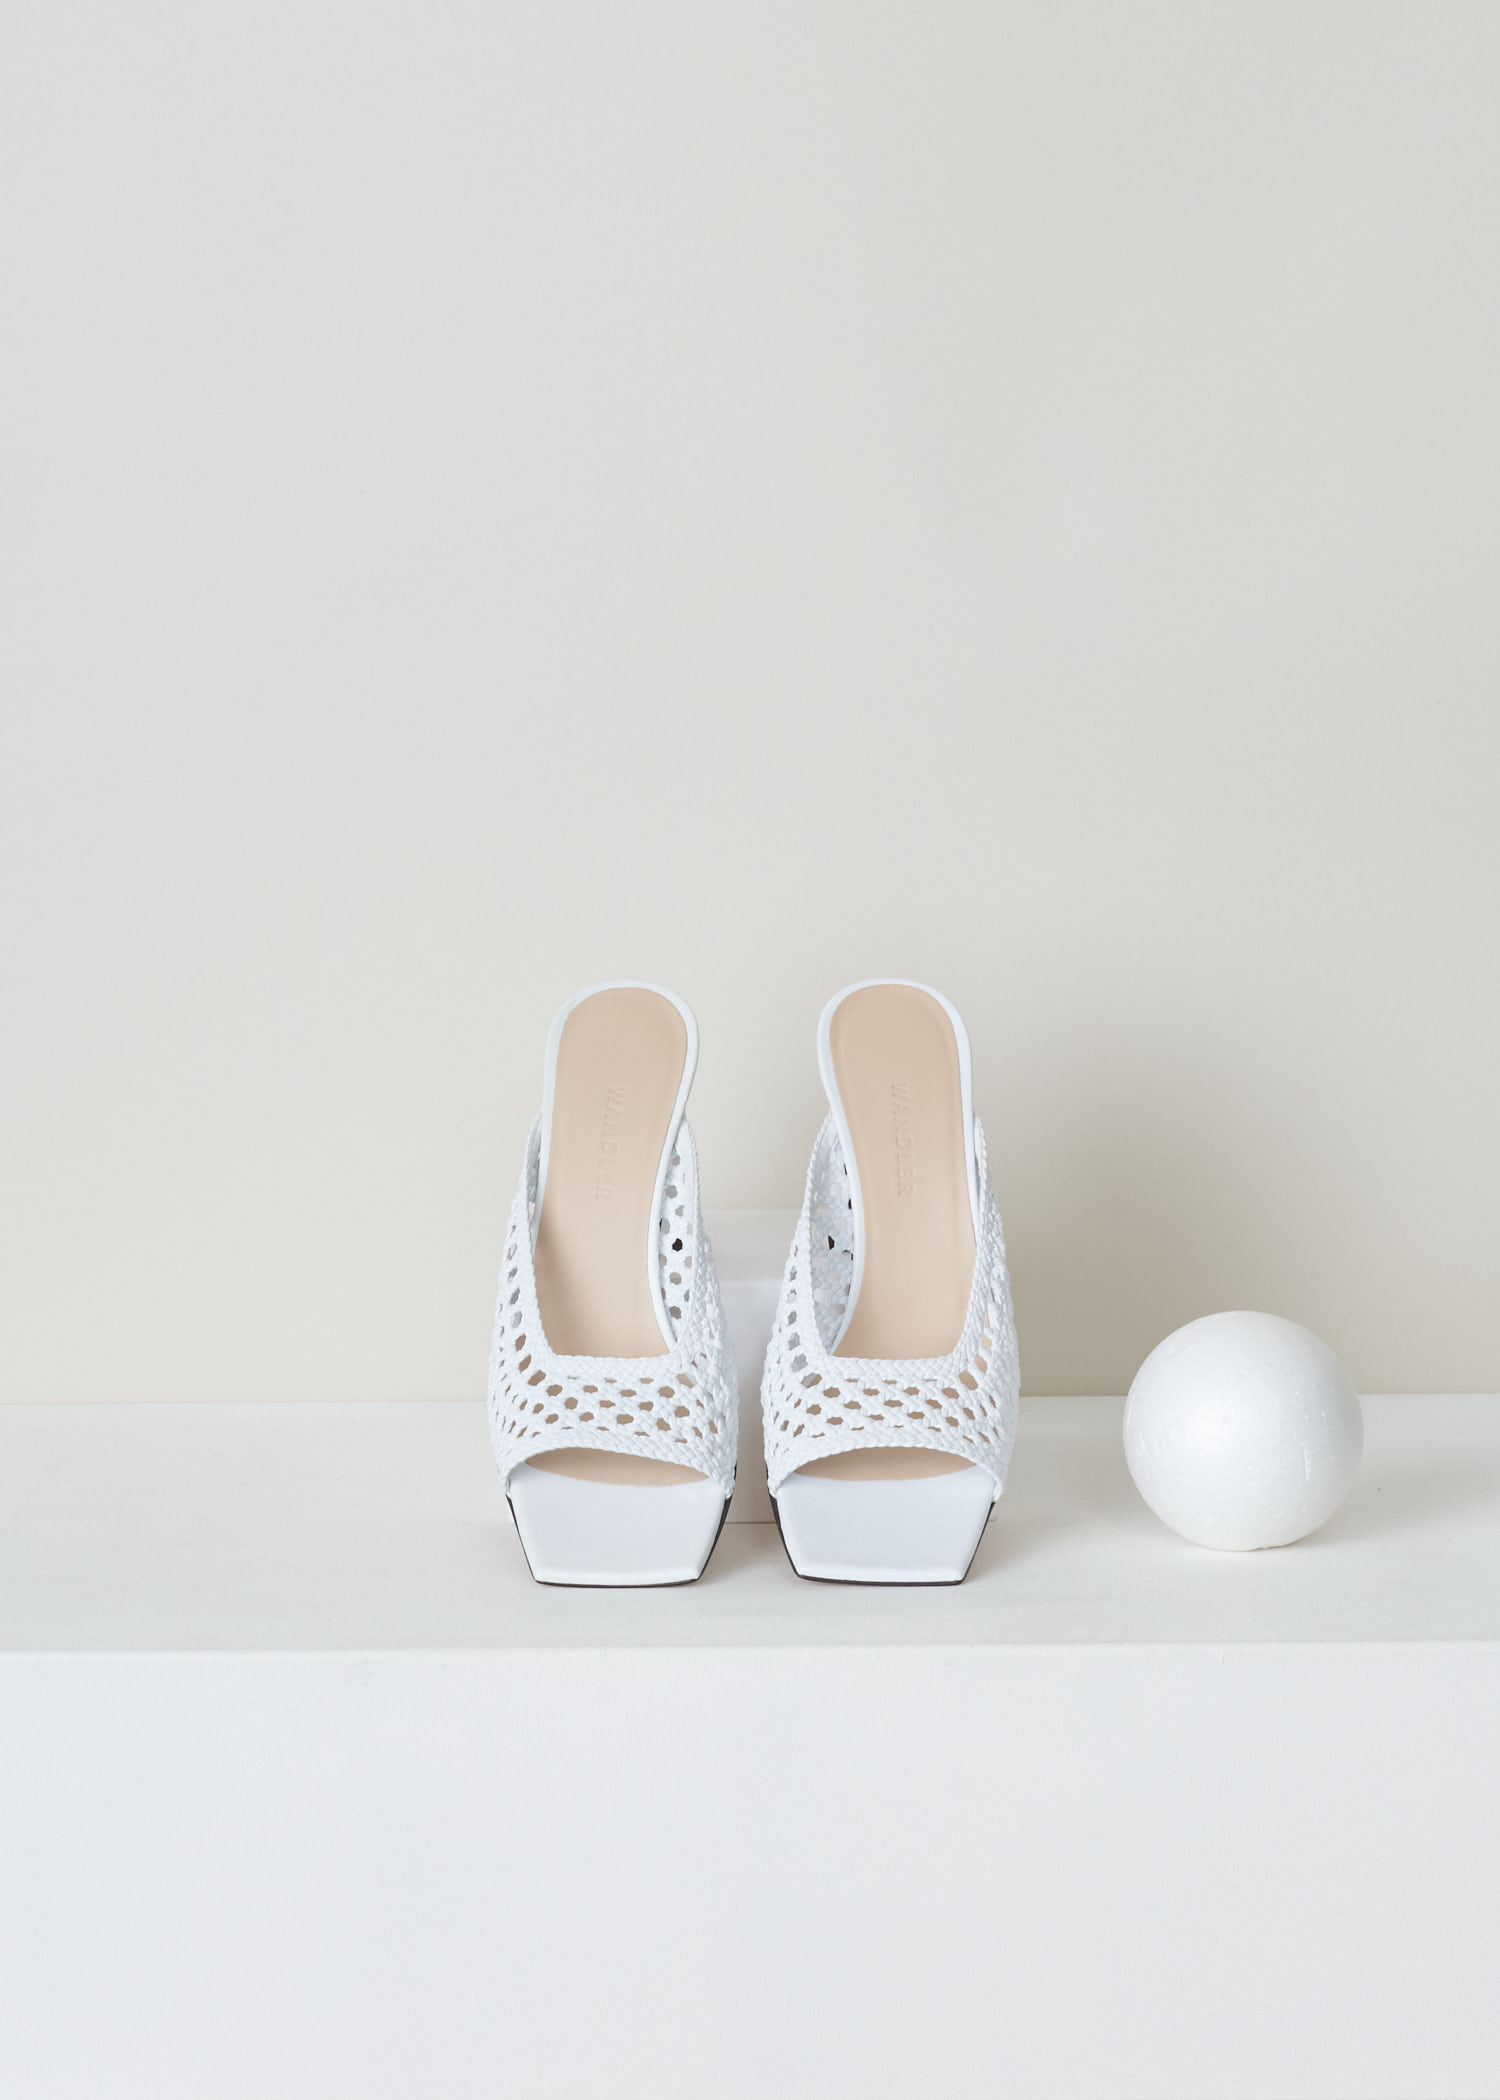 Wandler, White woven leather sandals, isa_sandal_mesh_white, white, top, White Wandler sandals made from together woven strands of lambskin, turned into this beautiful mesh. This model comes with square-cut toes, and leather soles.

heel height: 9 cm / 3.5 inch  